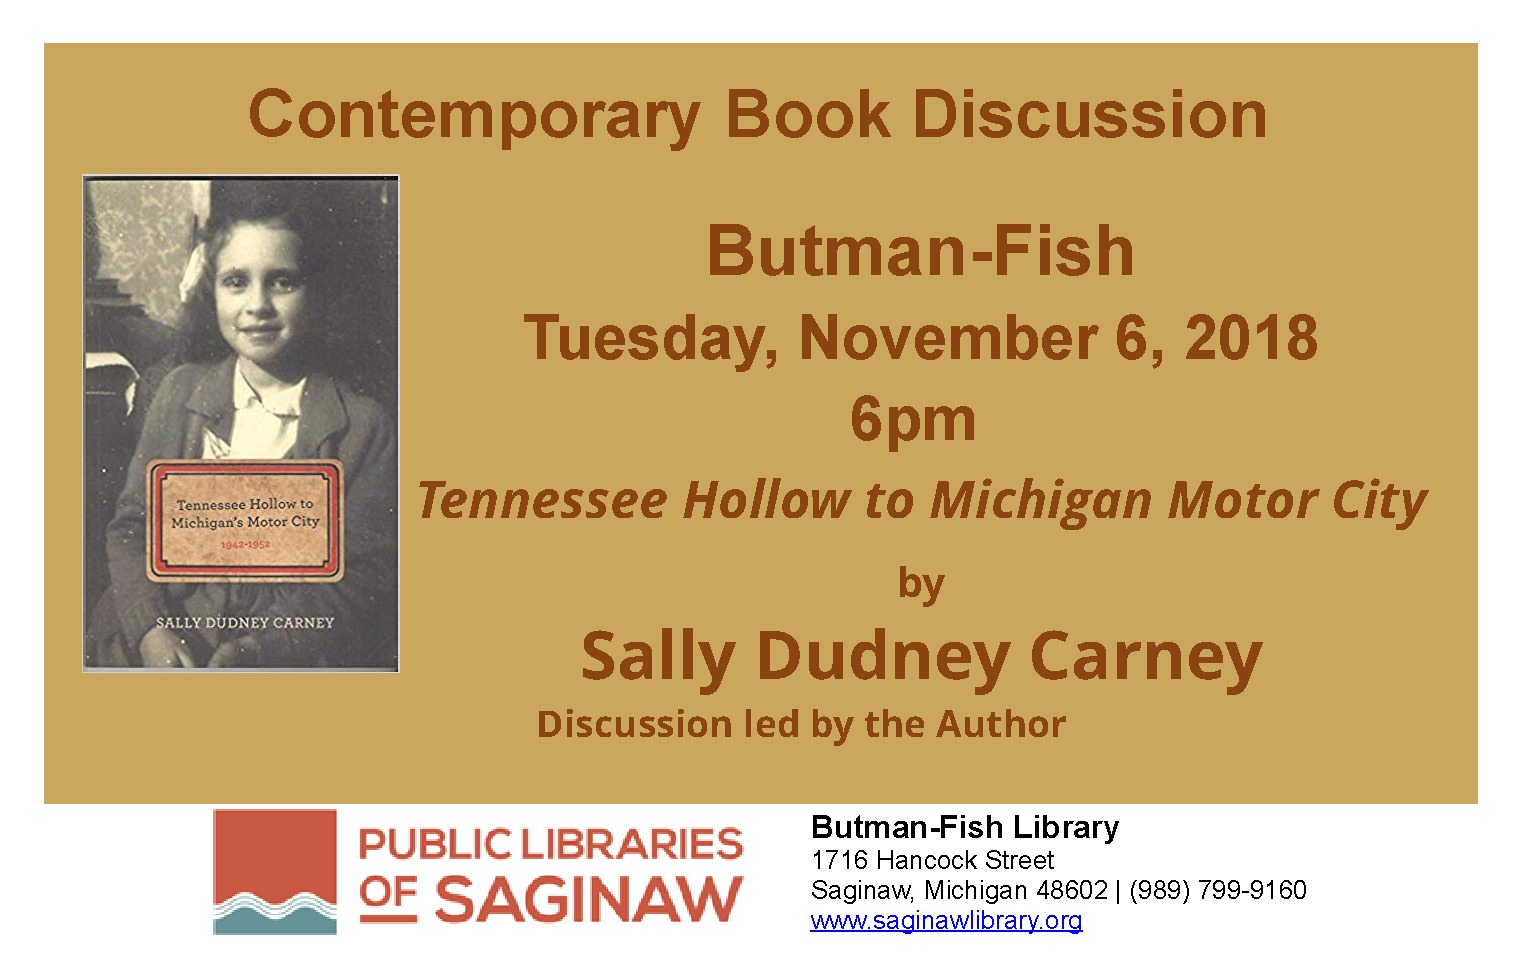 Tennessee Hollow to Michigan Motor City by Sally Dudney Carney - discussion led by the author.